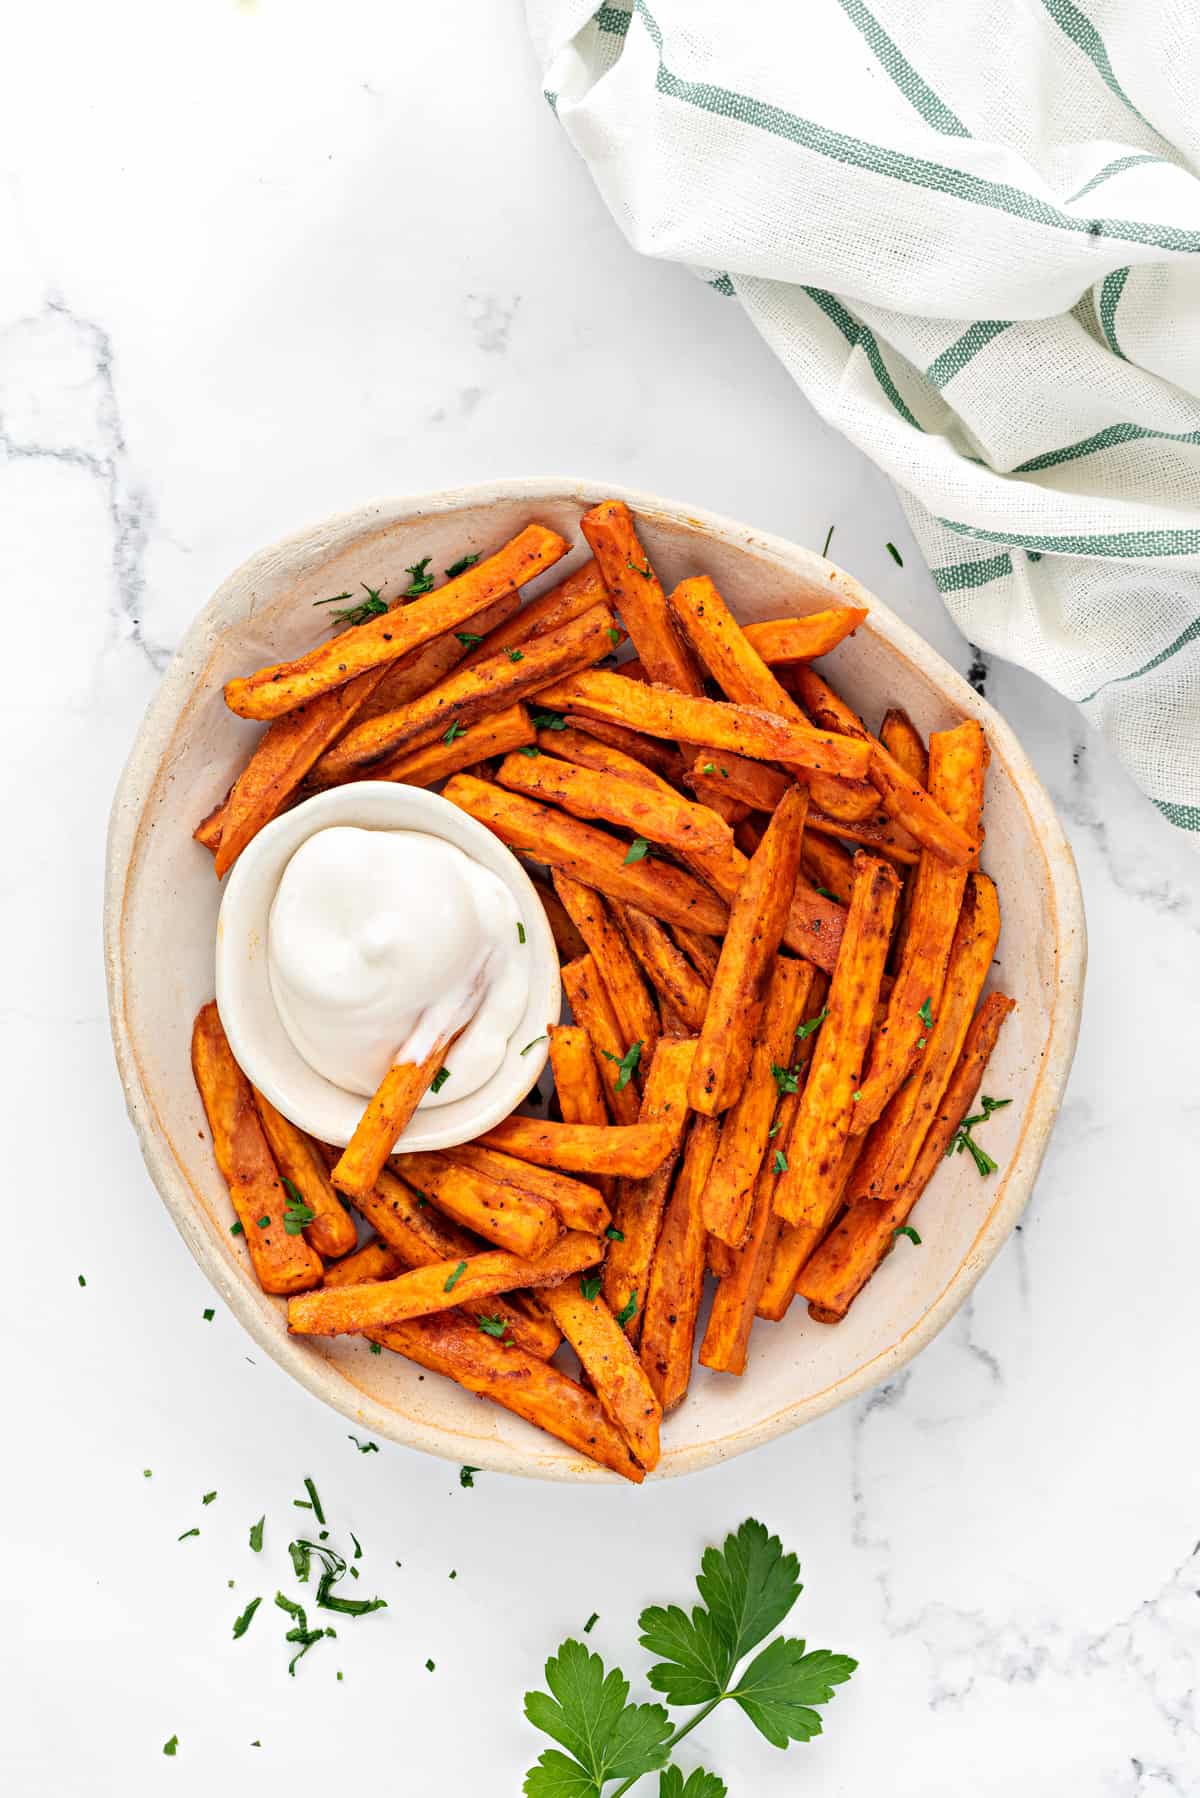 Are Sweet Potato Fries Really Healthier Than Regular Fries